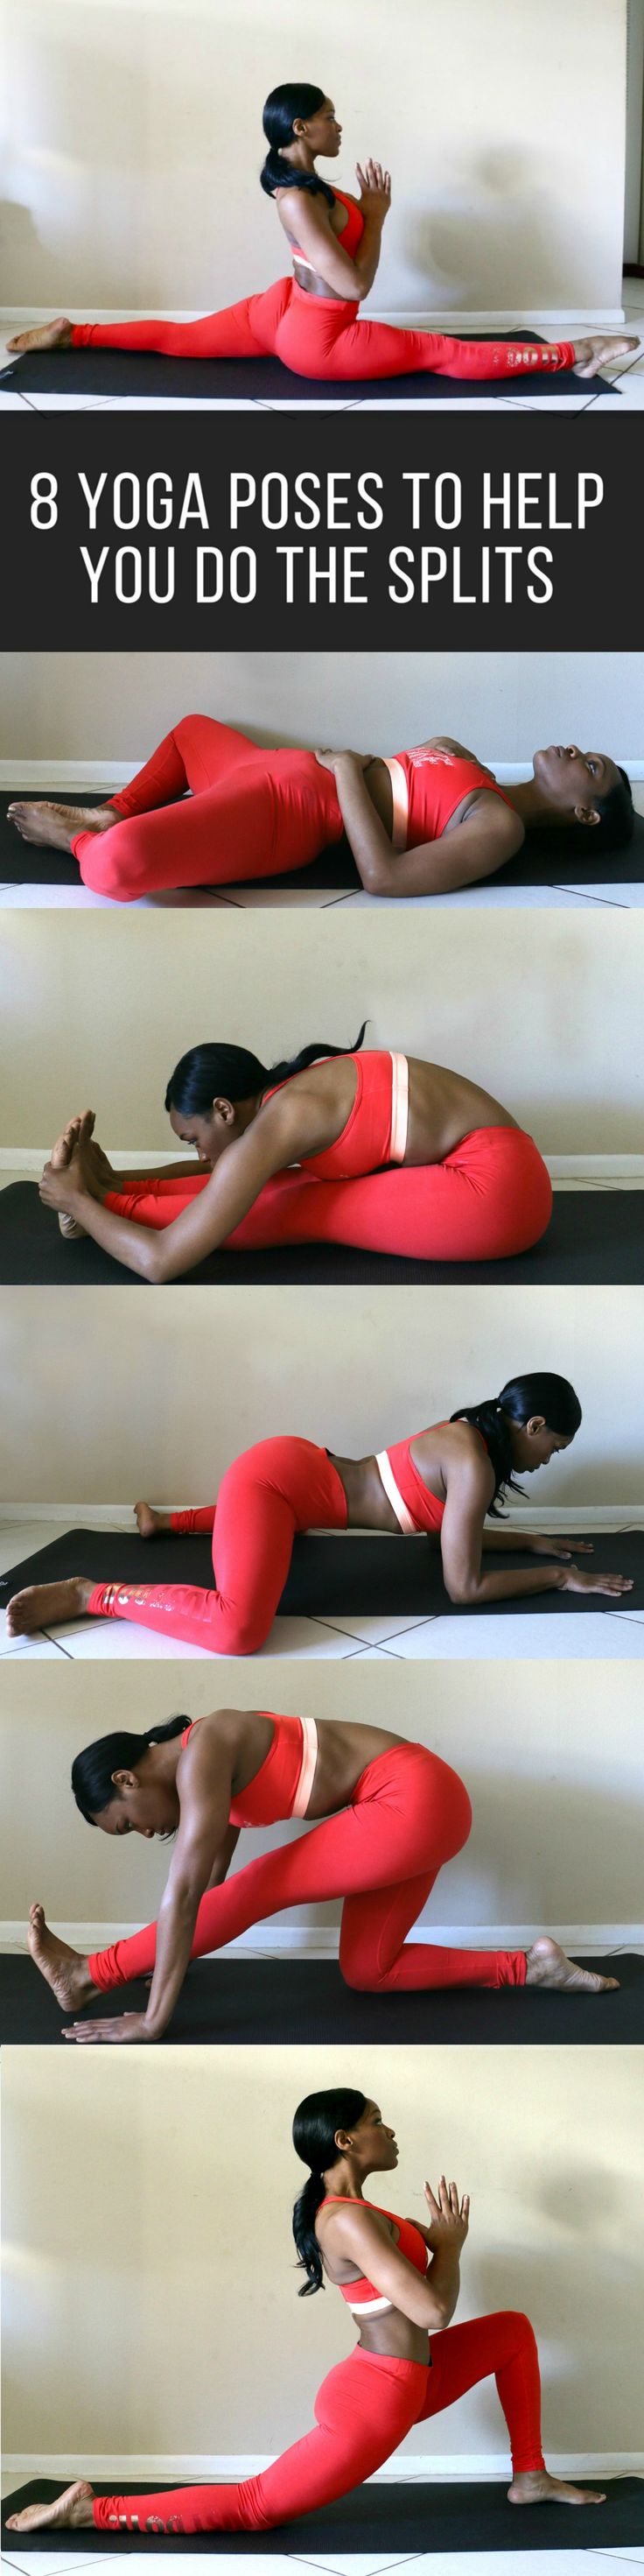 8 yoga poses to help you open your hips to do the splits.